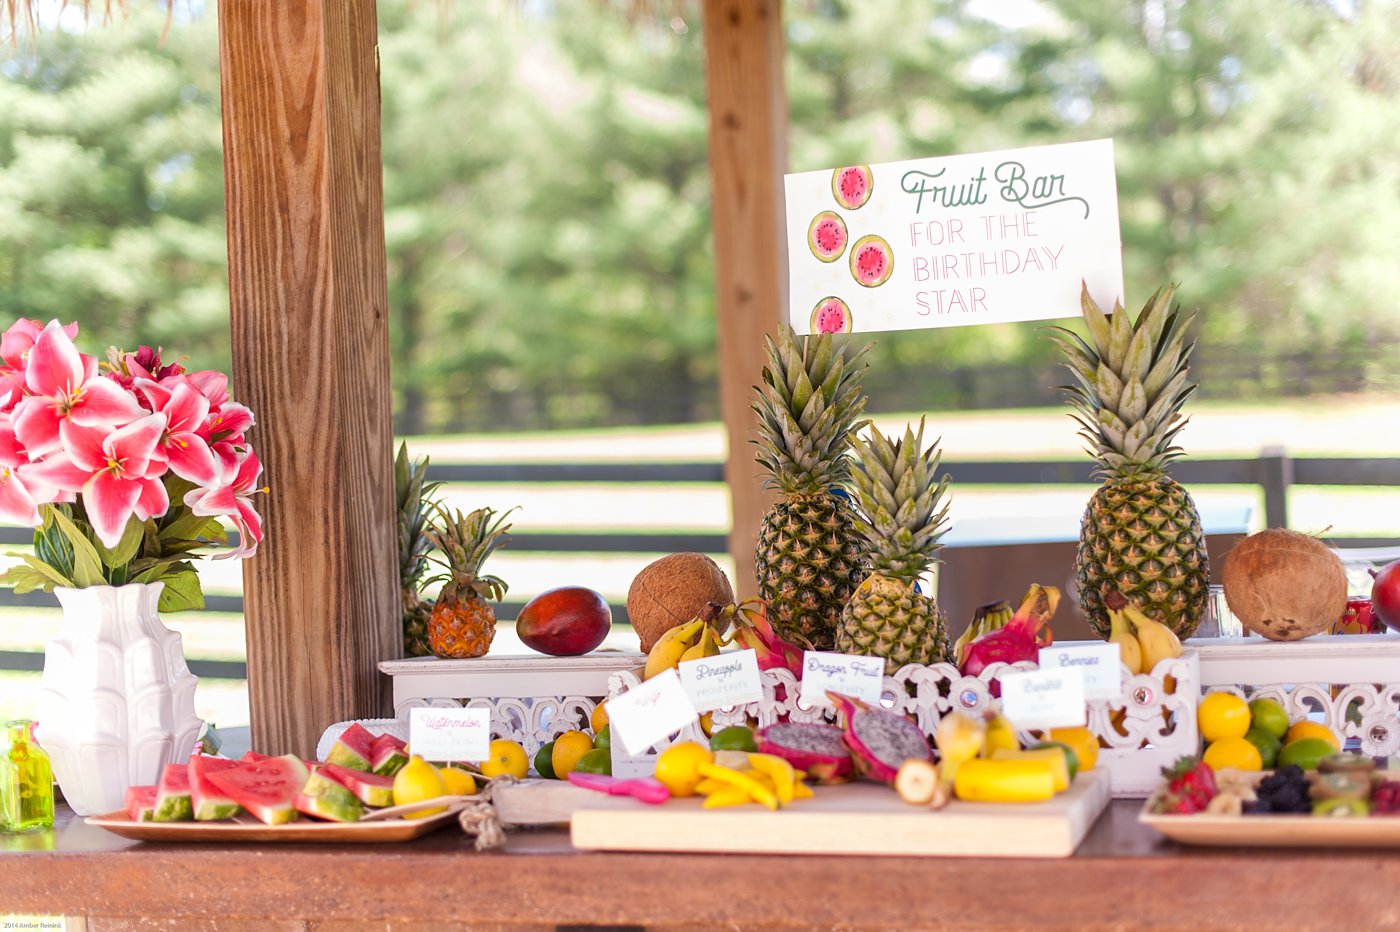 Fruit bar and sign for vintage cabana inspired birthday party